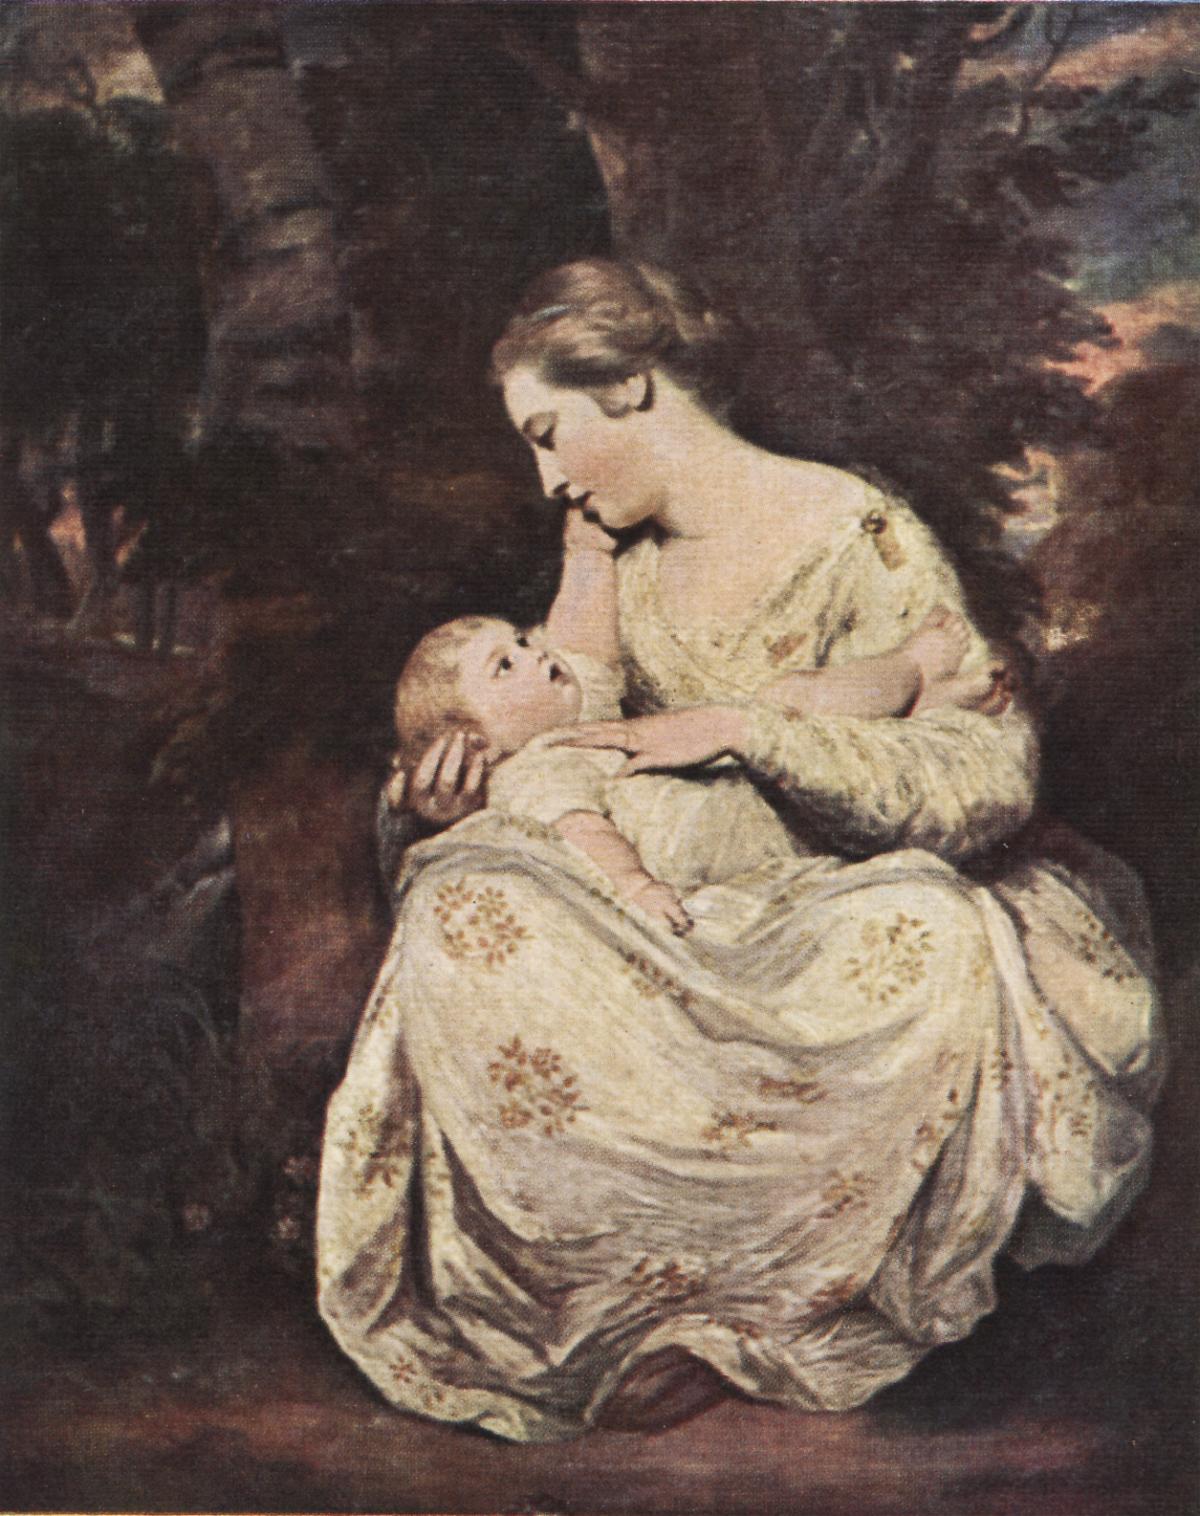 Mrs. Hoare and Child by Reynolds